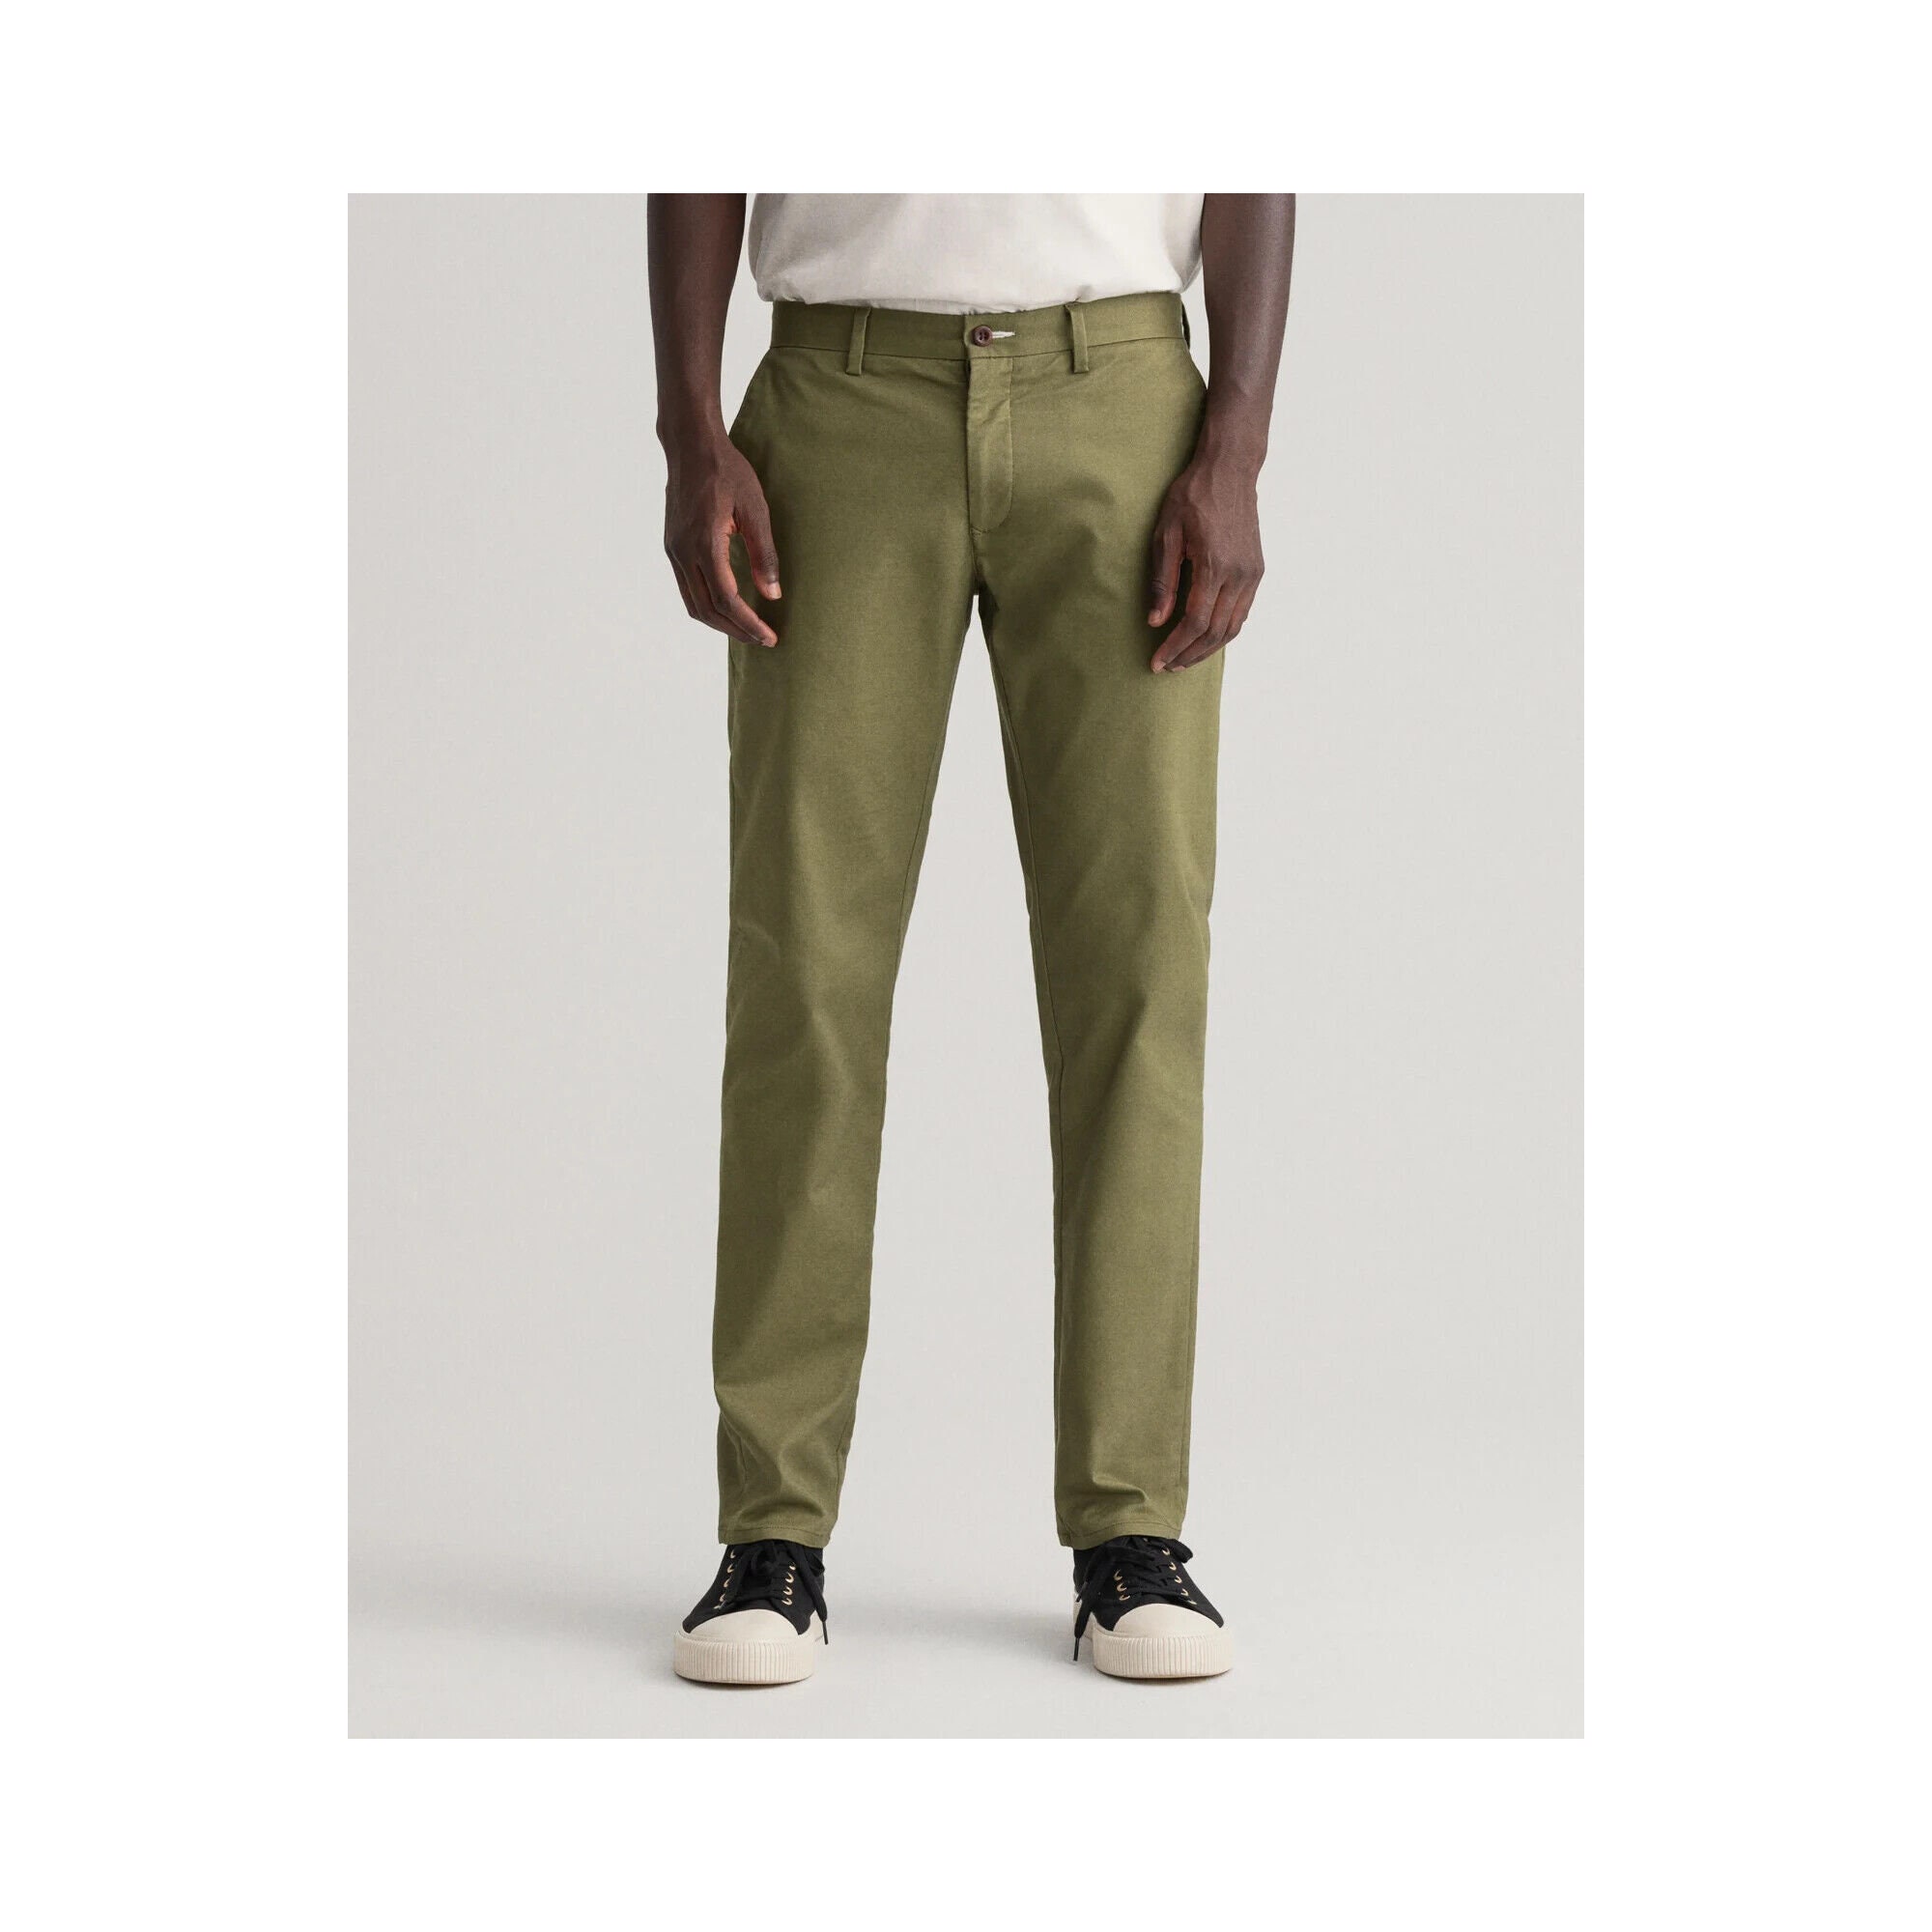 NWOT Ermengildo Zegna Two Pair Olive And Brown Tropical Wool Trousers Size  36  eBay